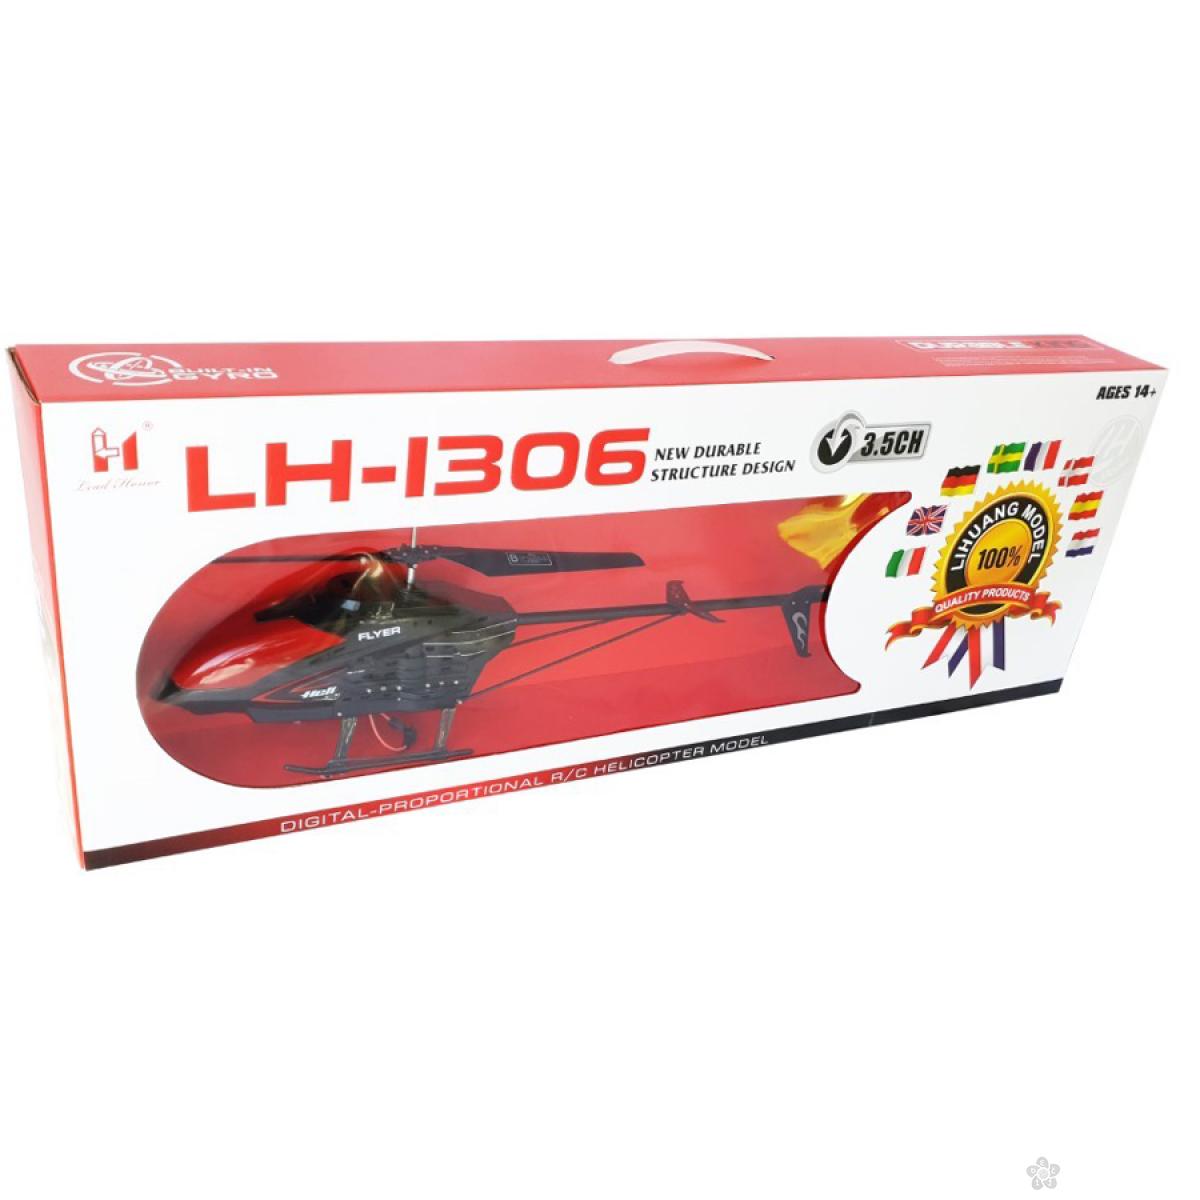 Helikopter R/C LH1306 